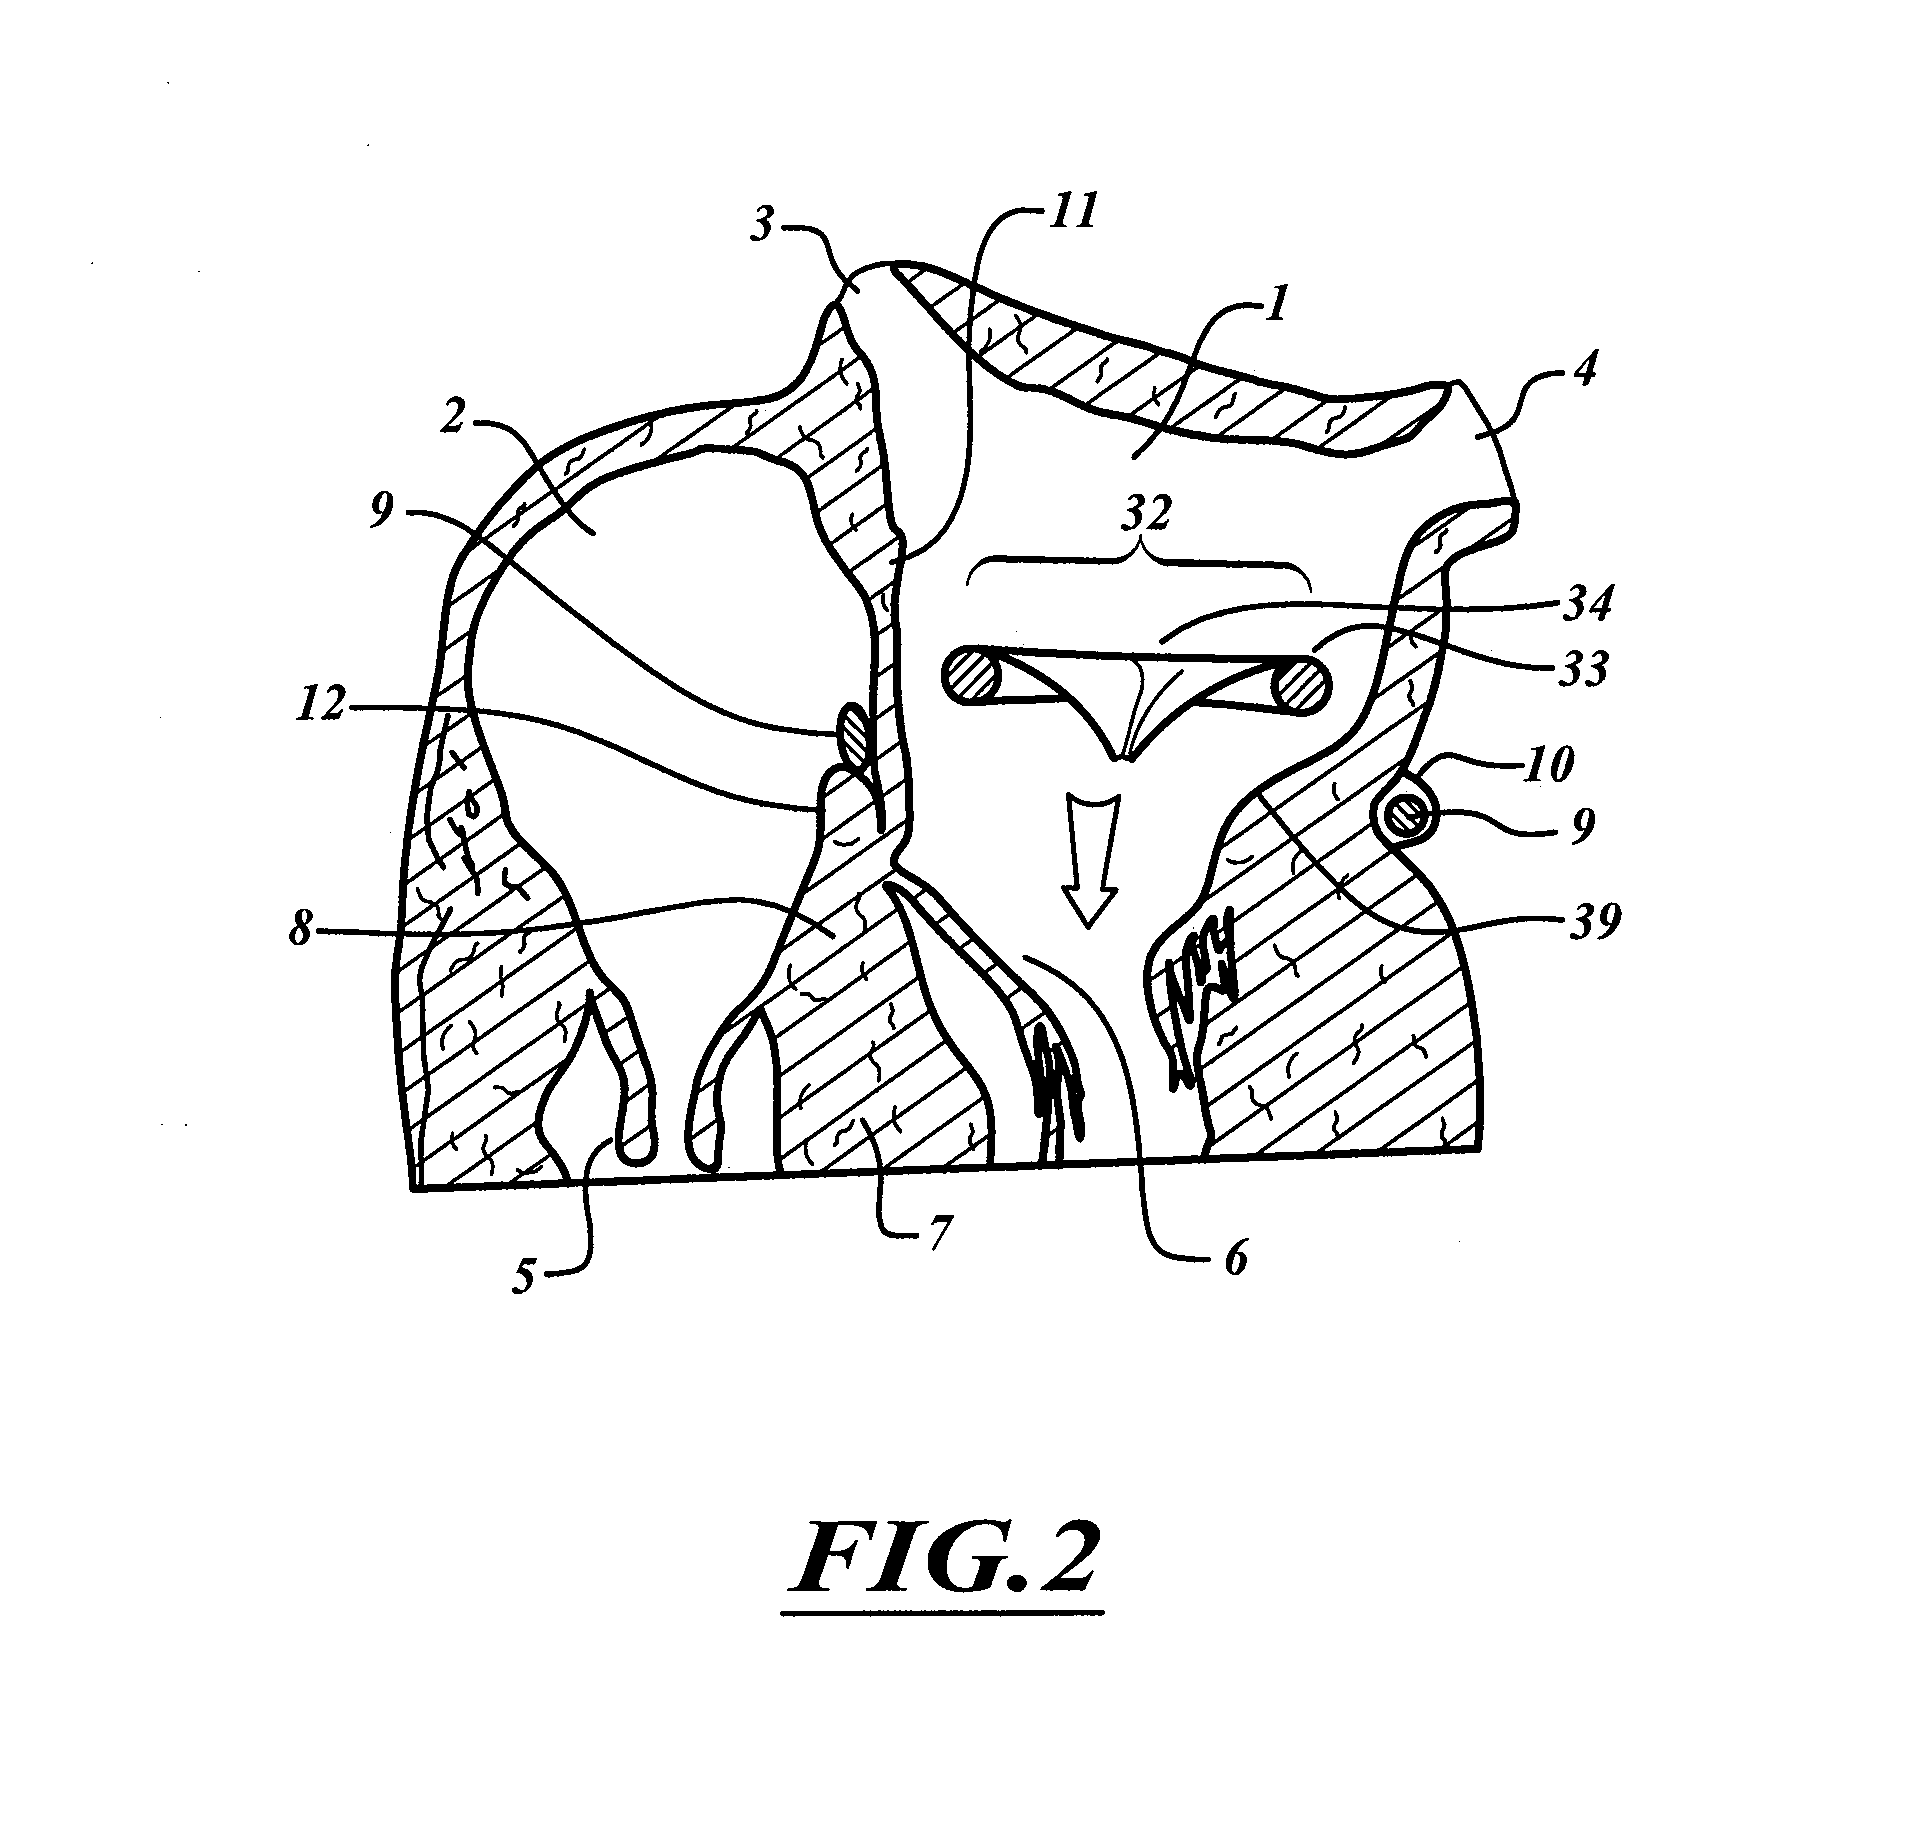 Method for anchoring a mitral valve